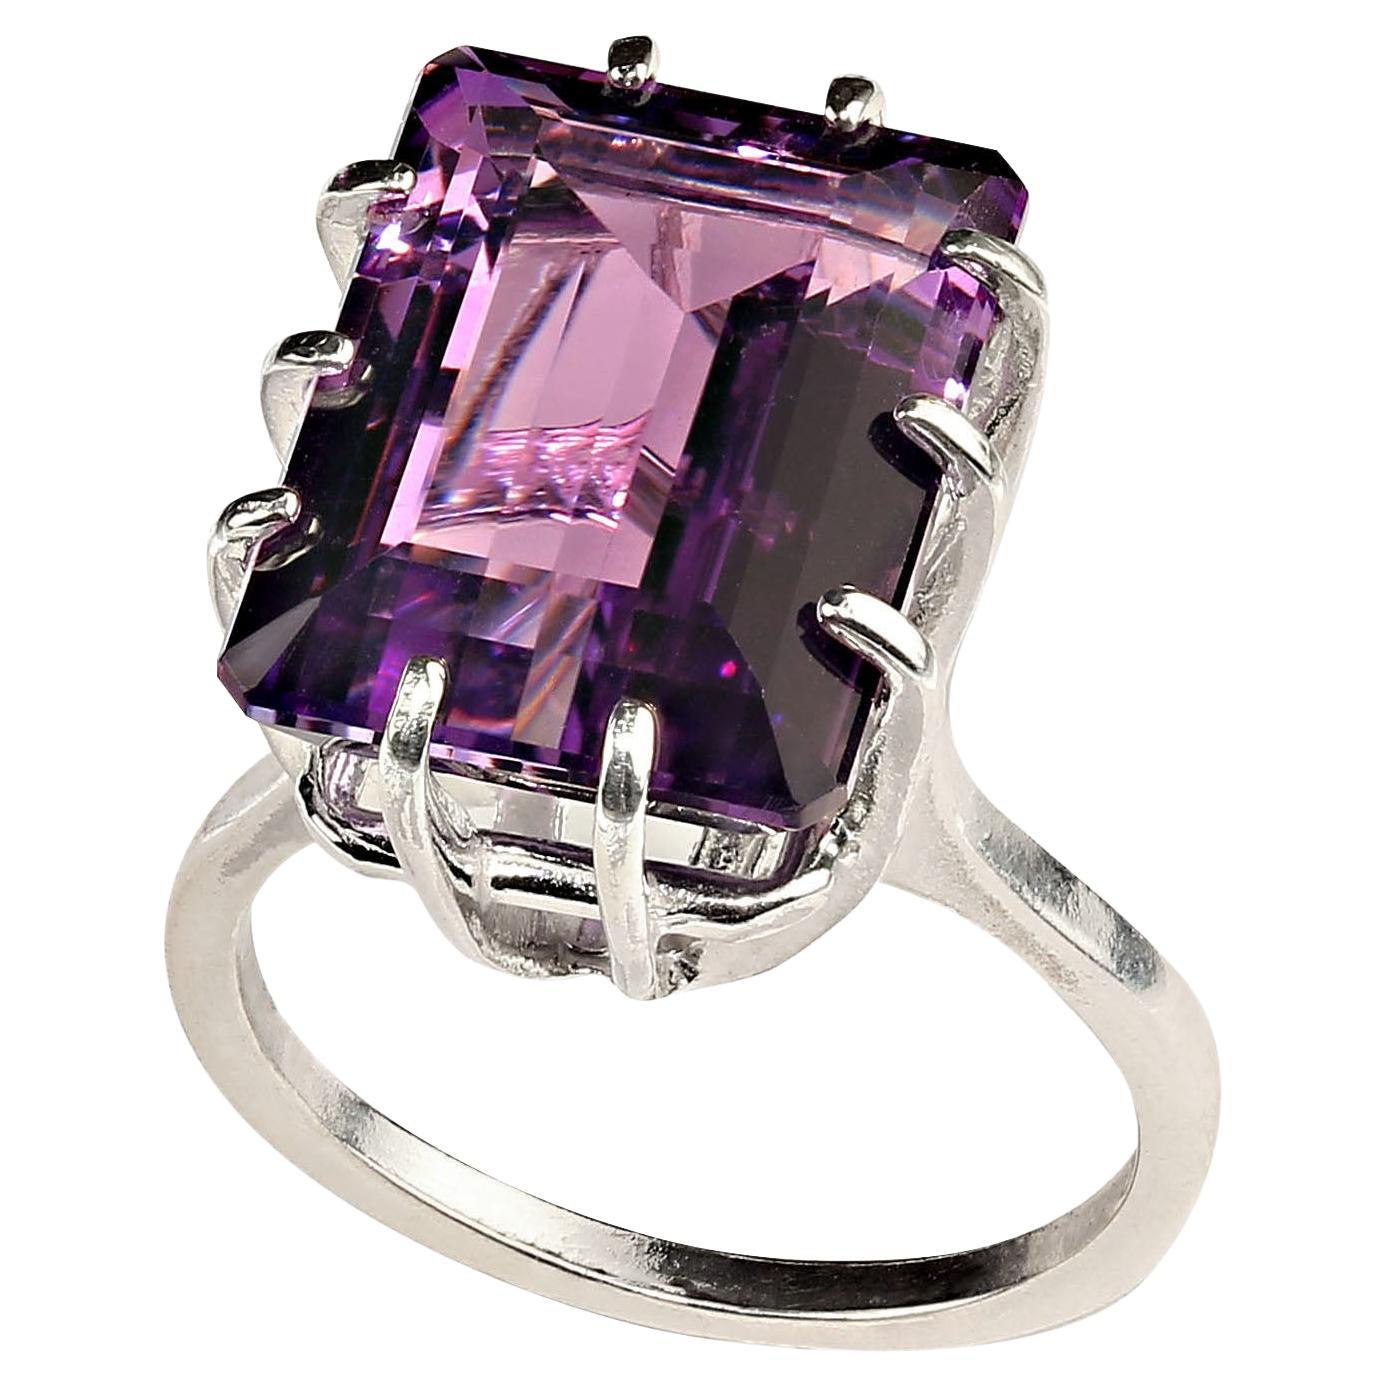 Sparkling Brazilian Emerald Cut Amethyst set in Sterling Silver prongs.  This 11.15 carat gem is medium tone with flashes of pink.  No changes by seller.  Sizable 8. Amethyst is the February birthstone and is said to protect from intoxication and